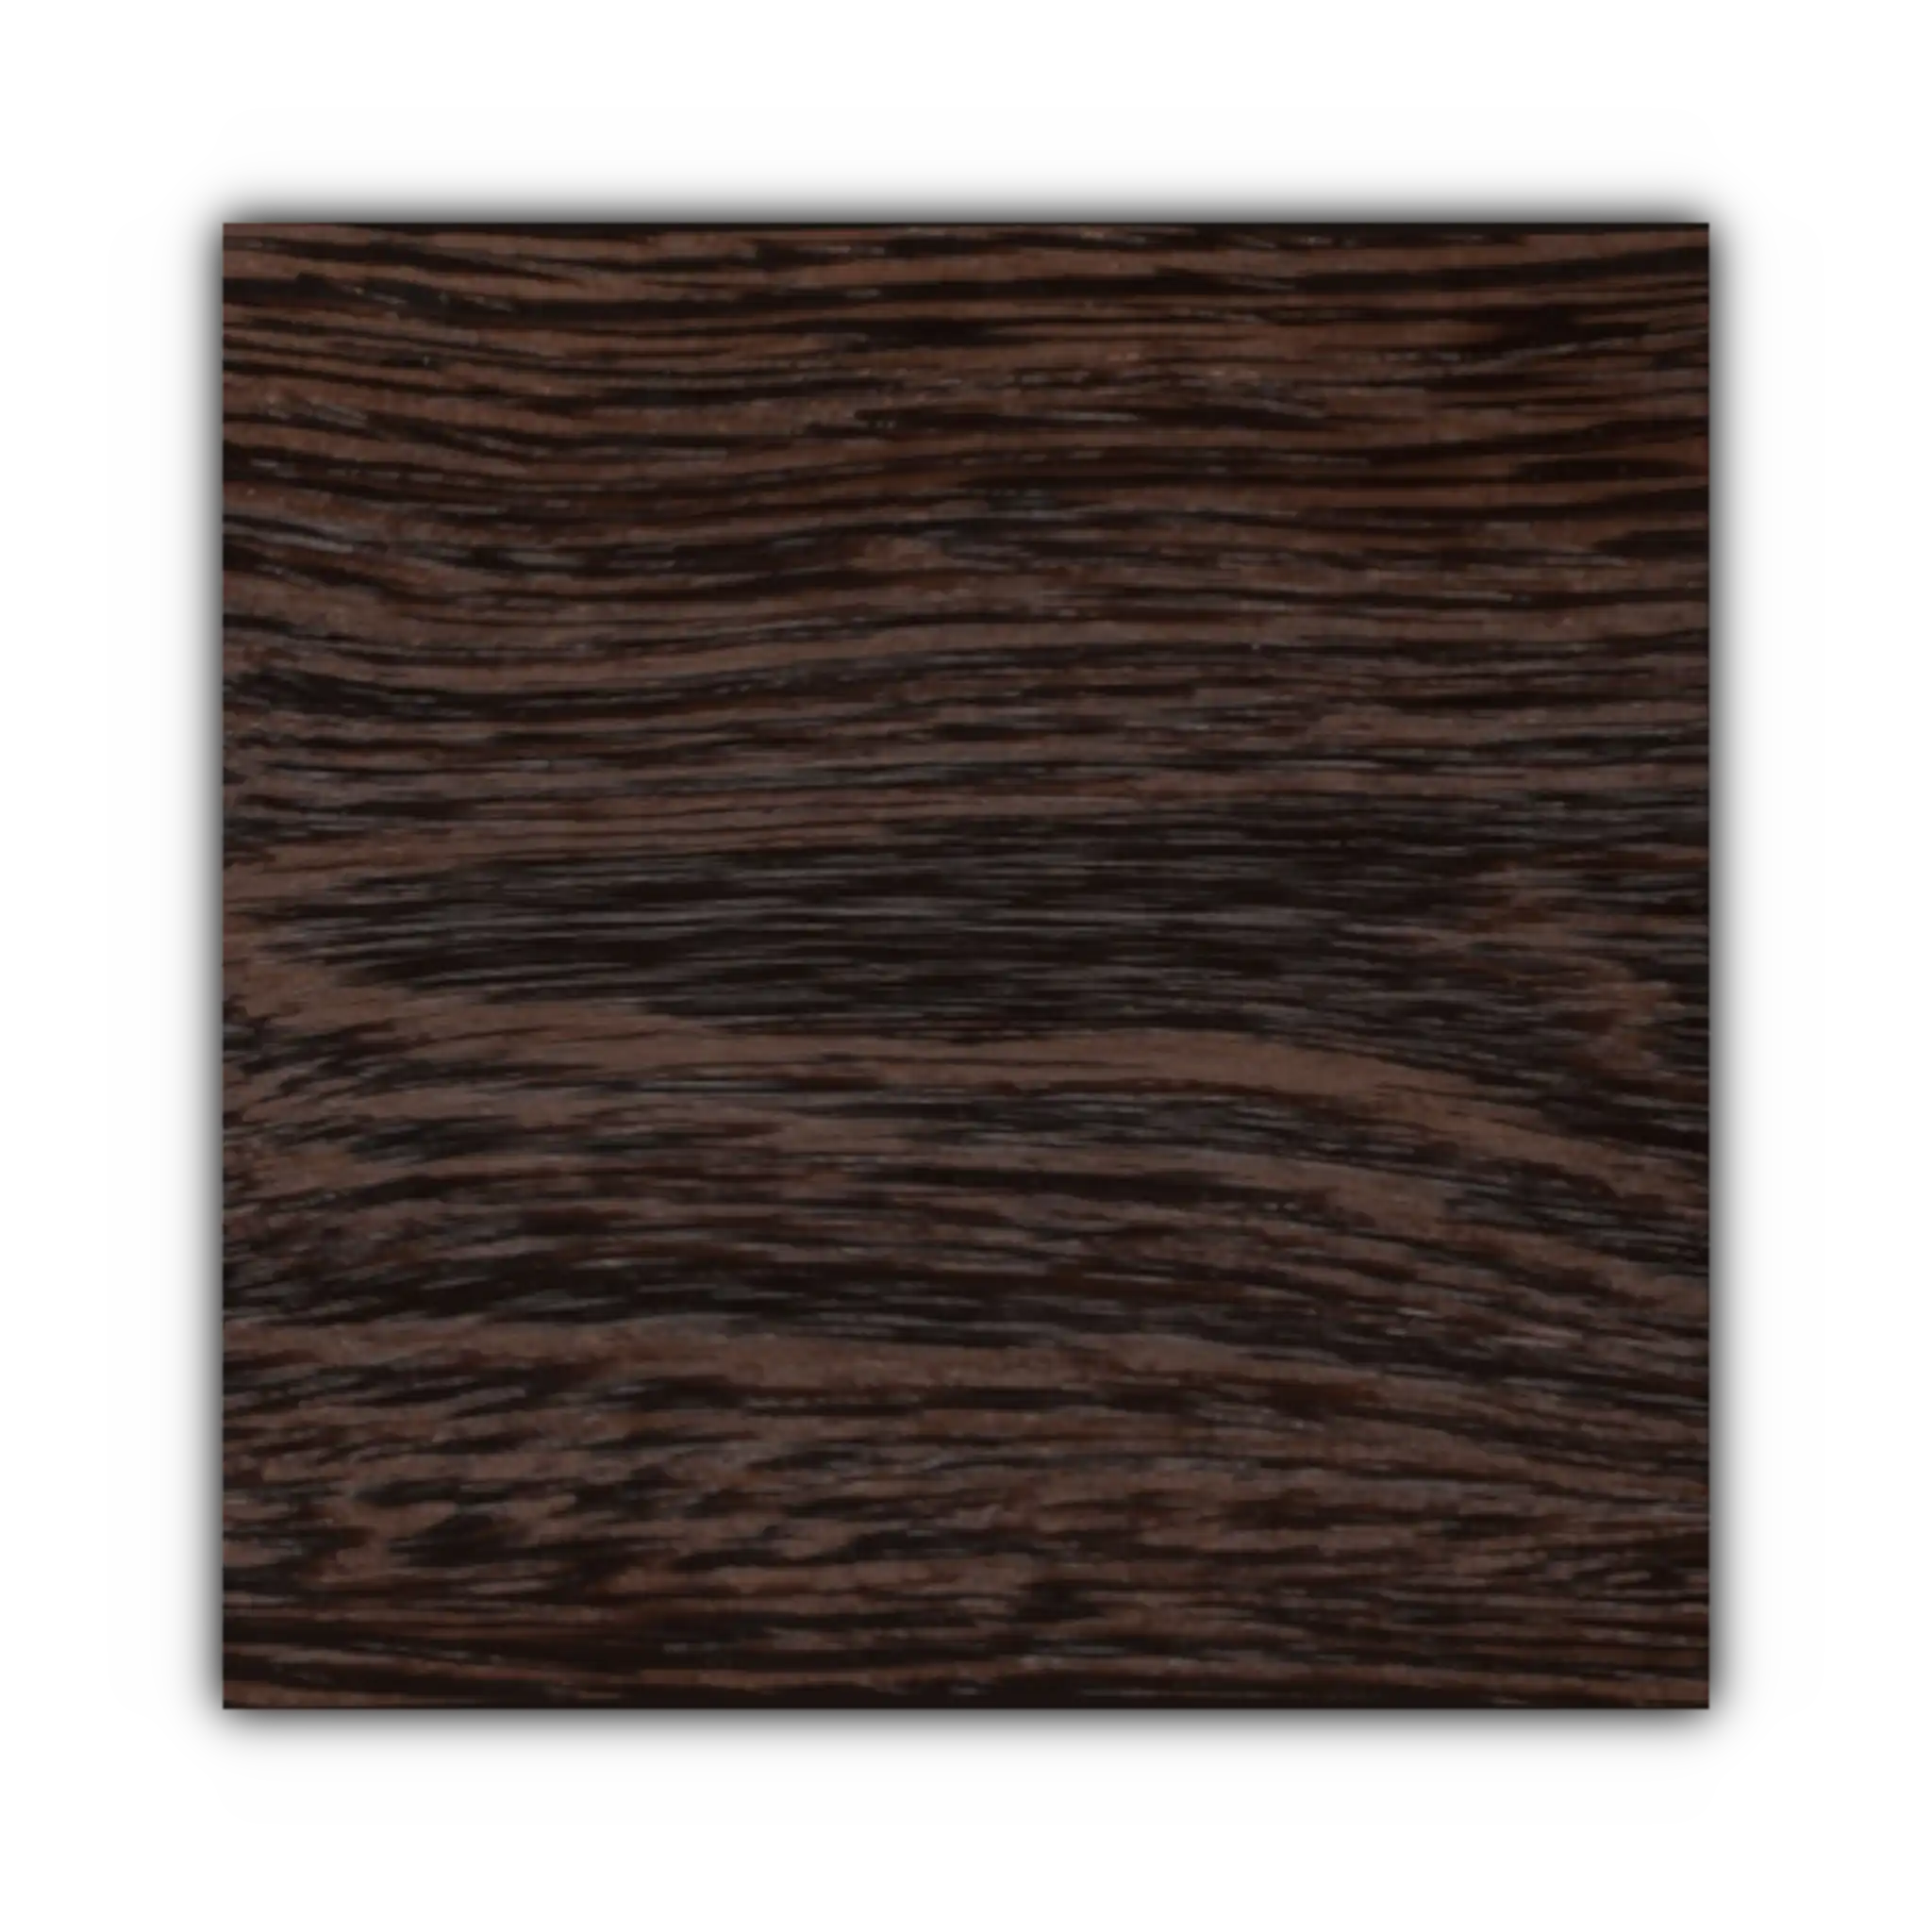 A tile that shows the structure of wenge wood